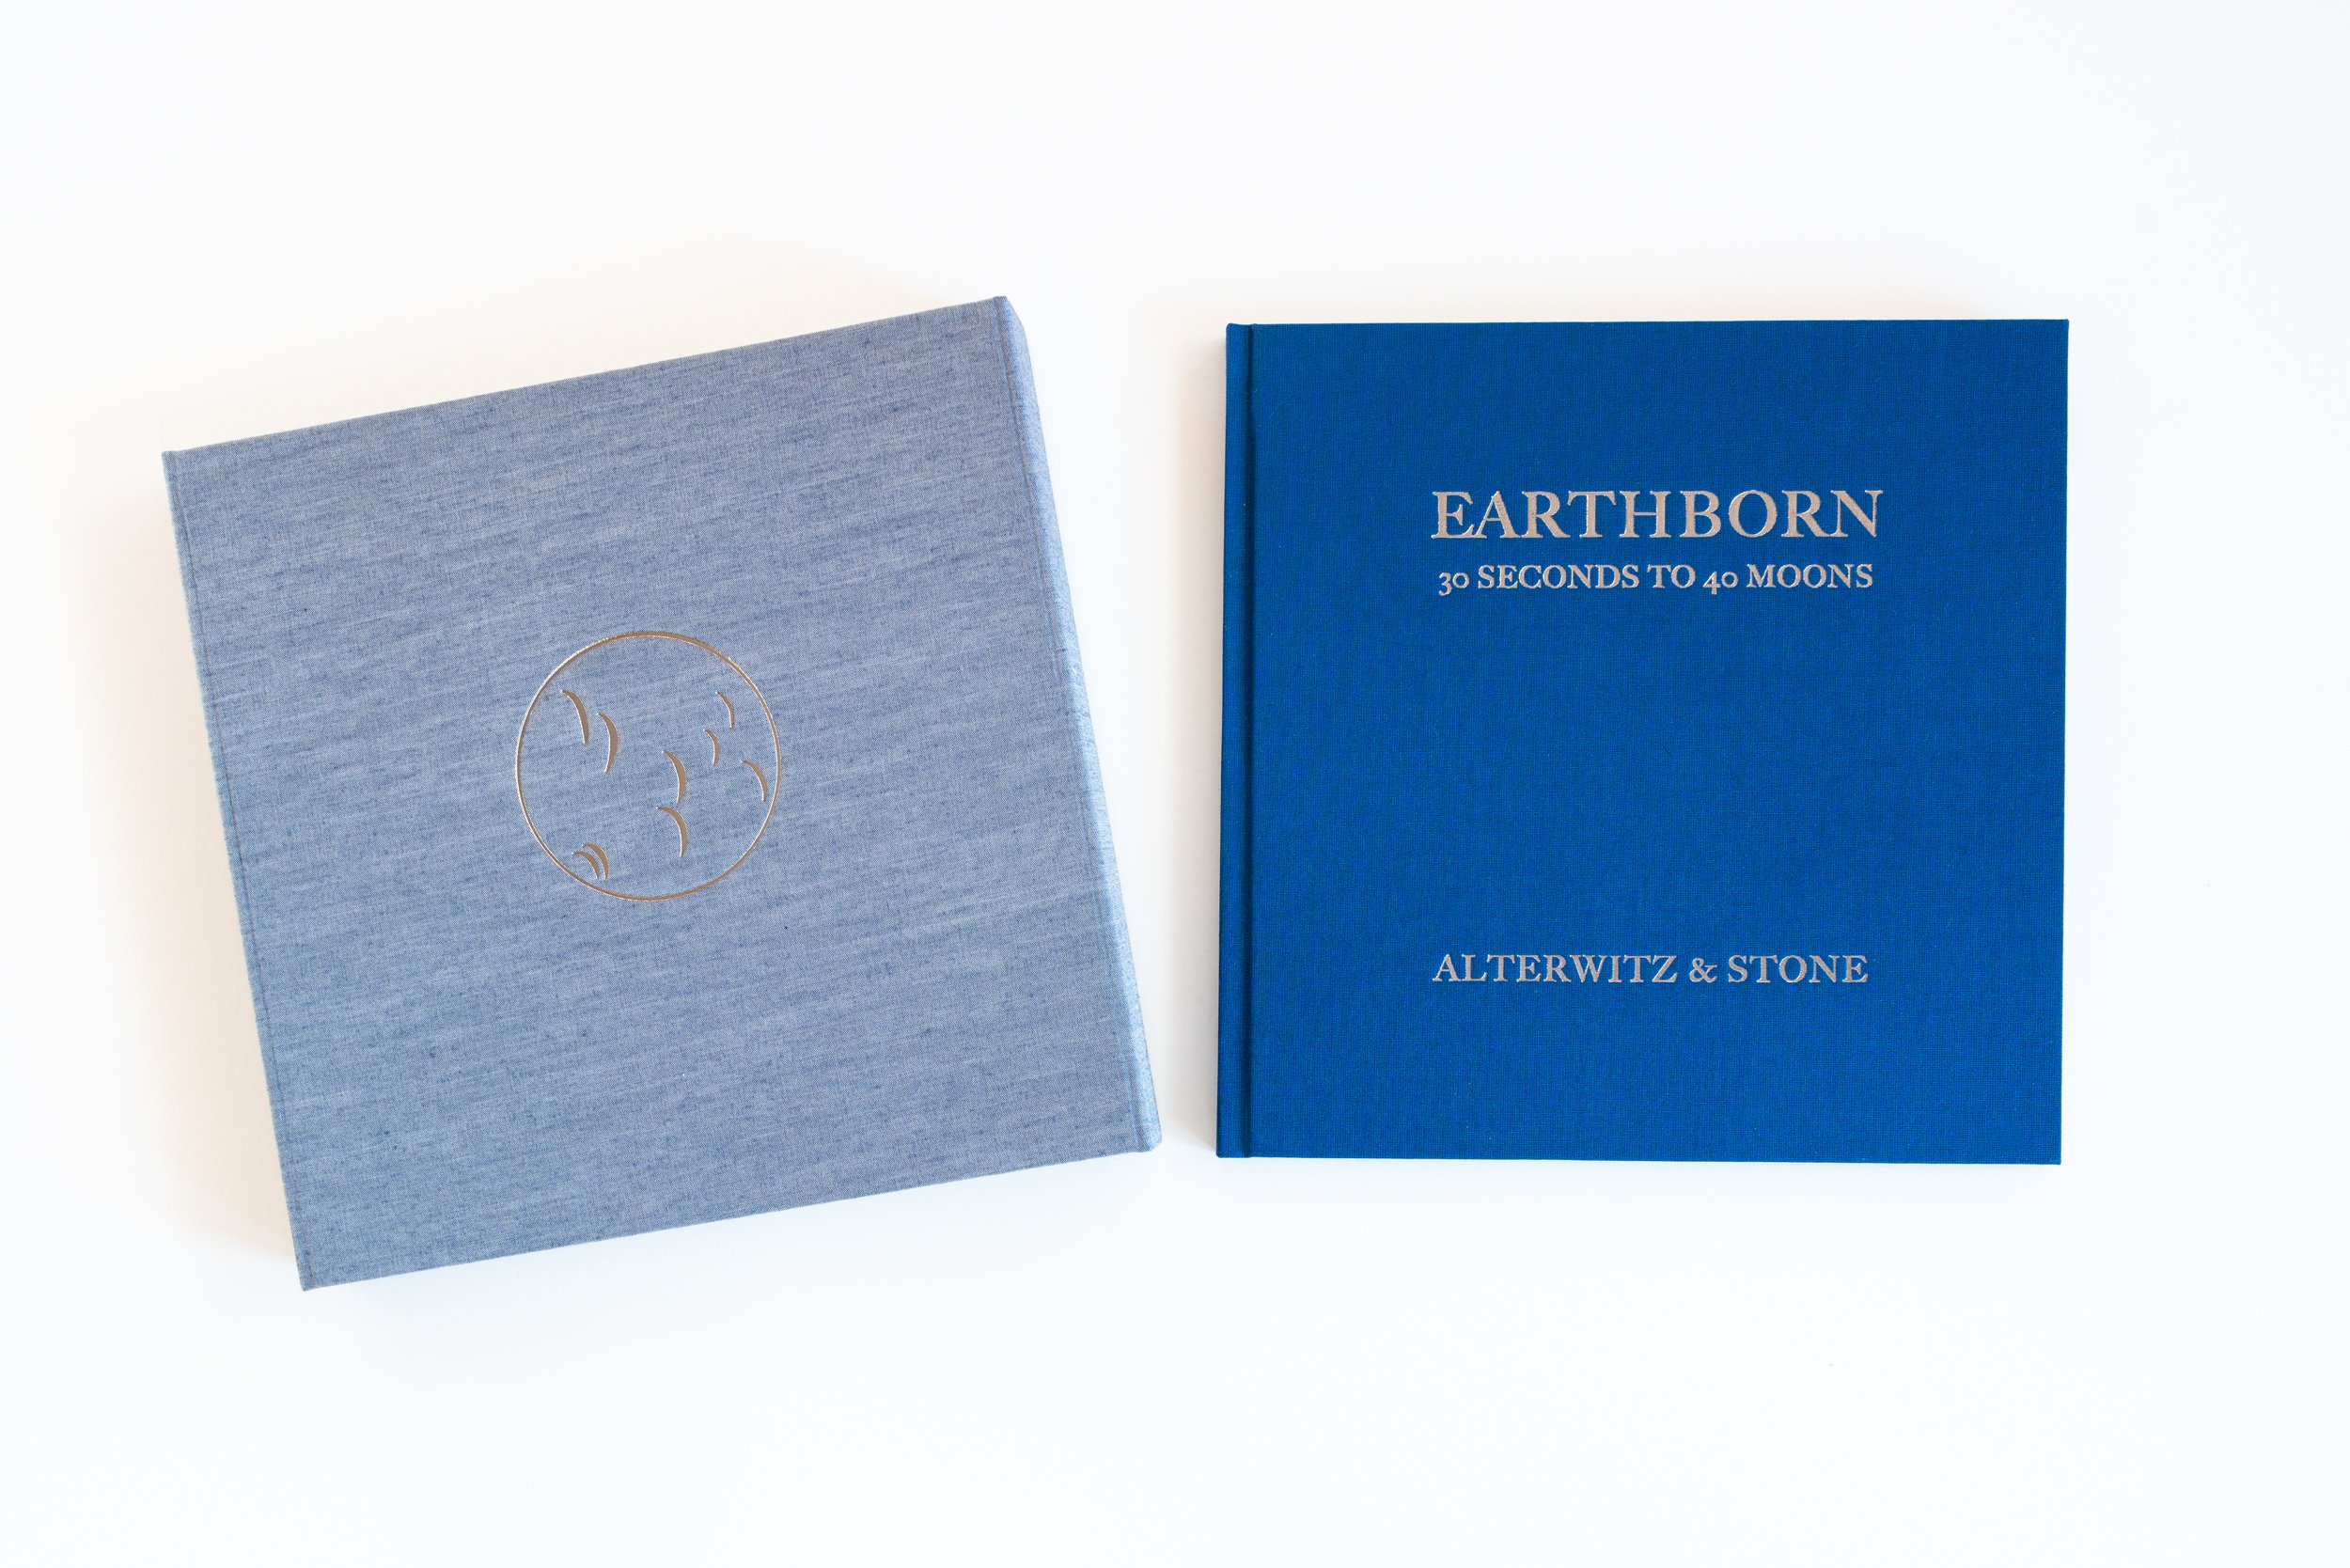 Acquire_Earthborn_Limited_Edition_08.jpg